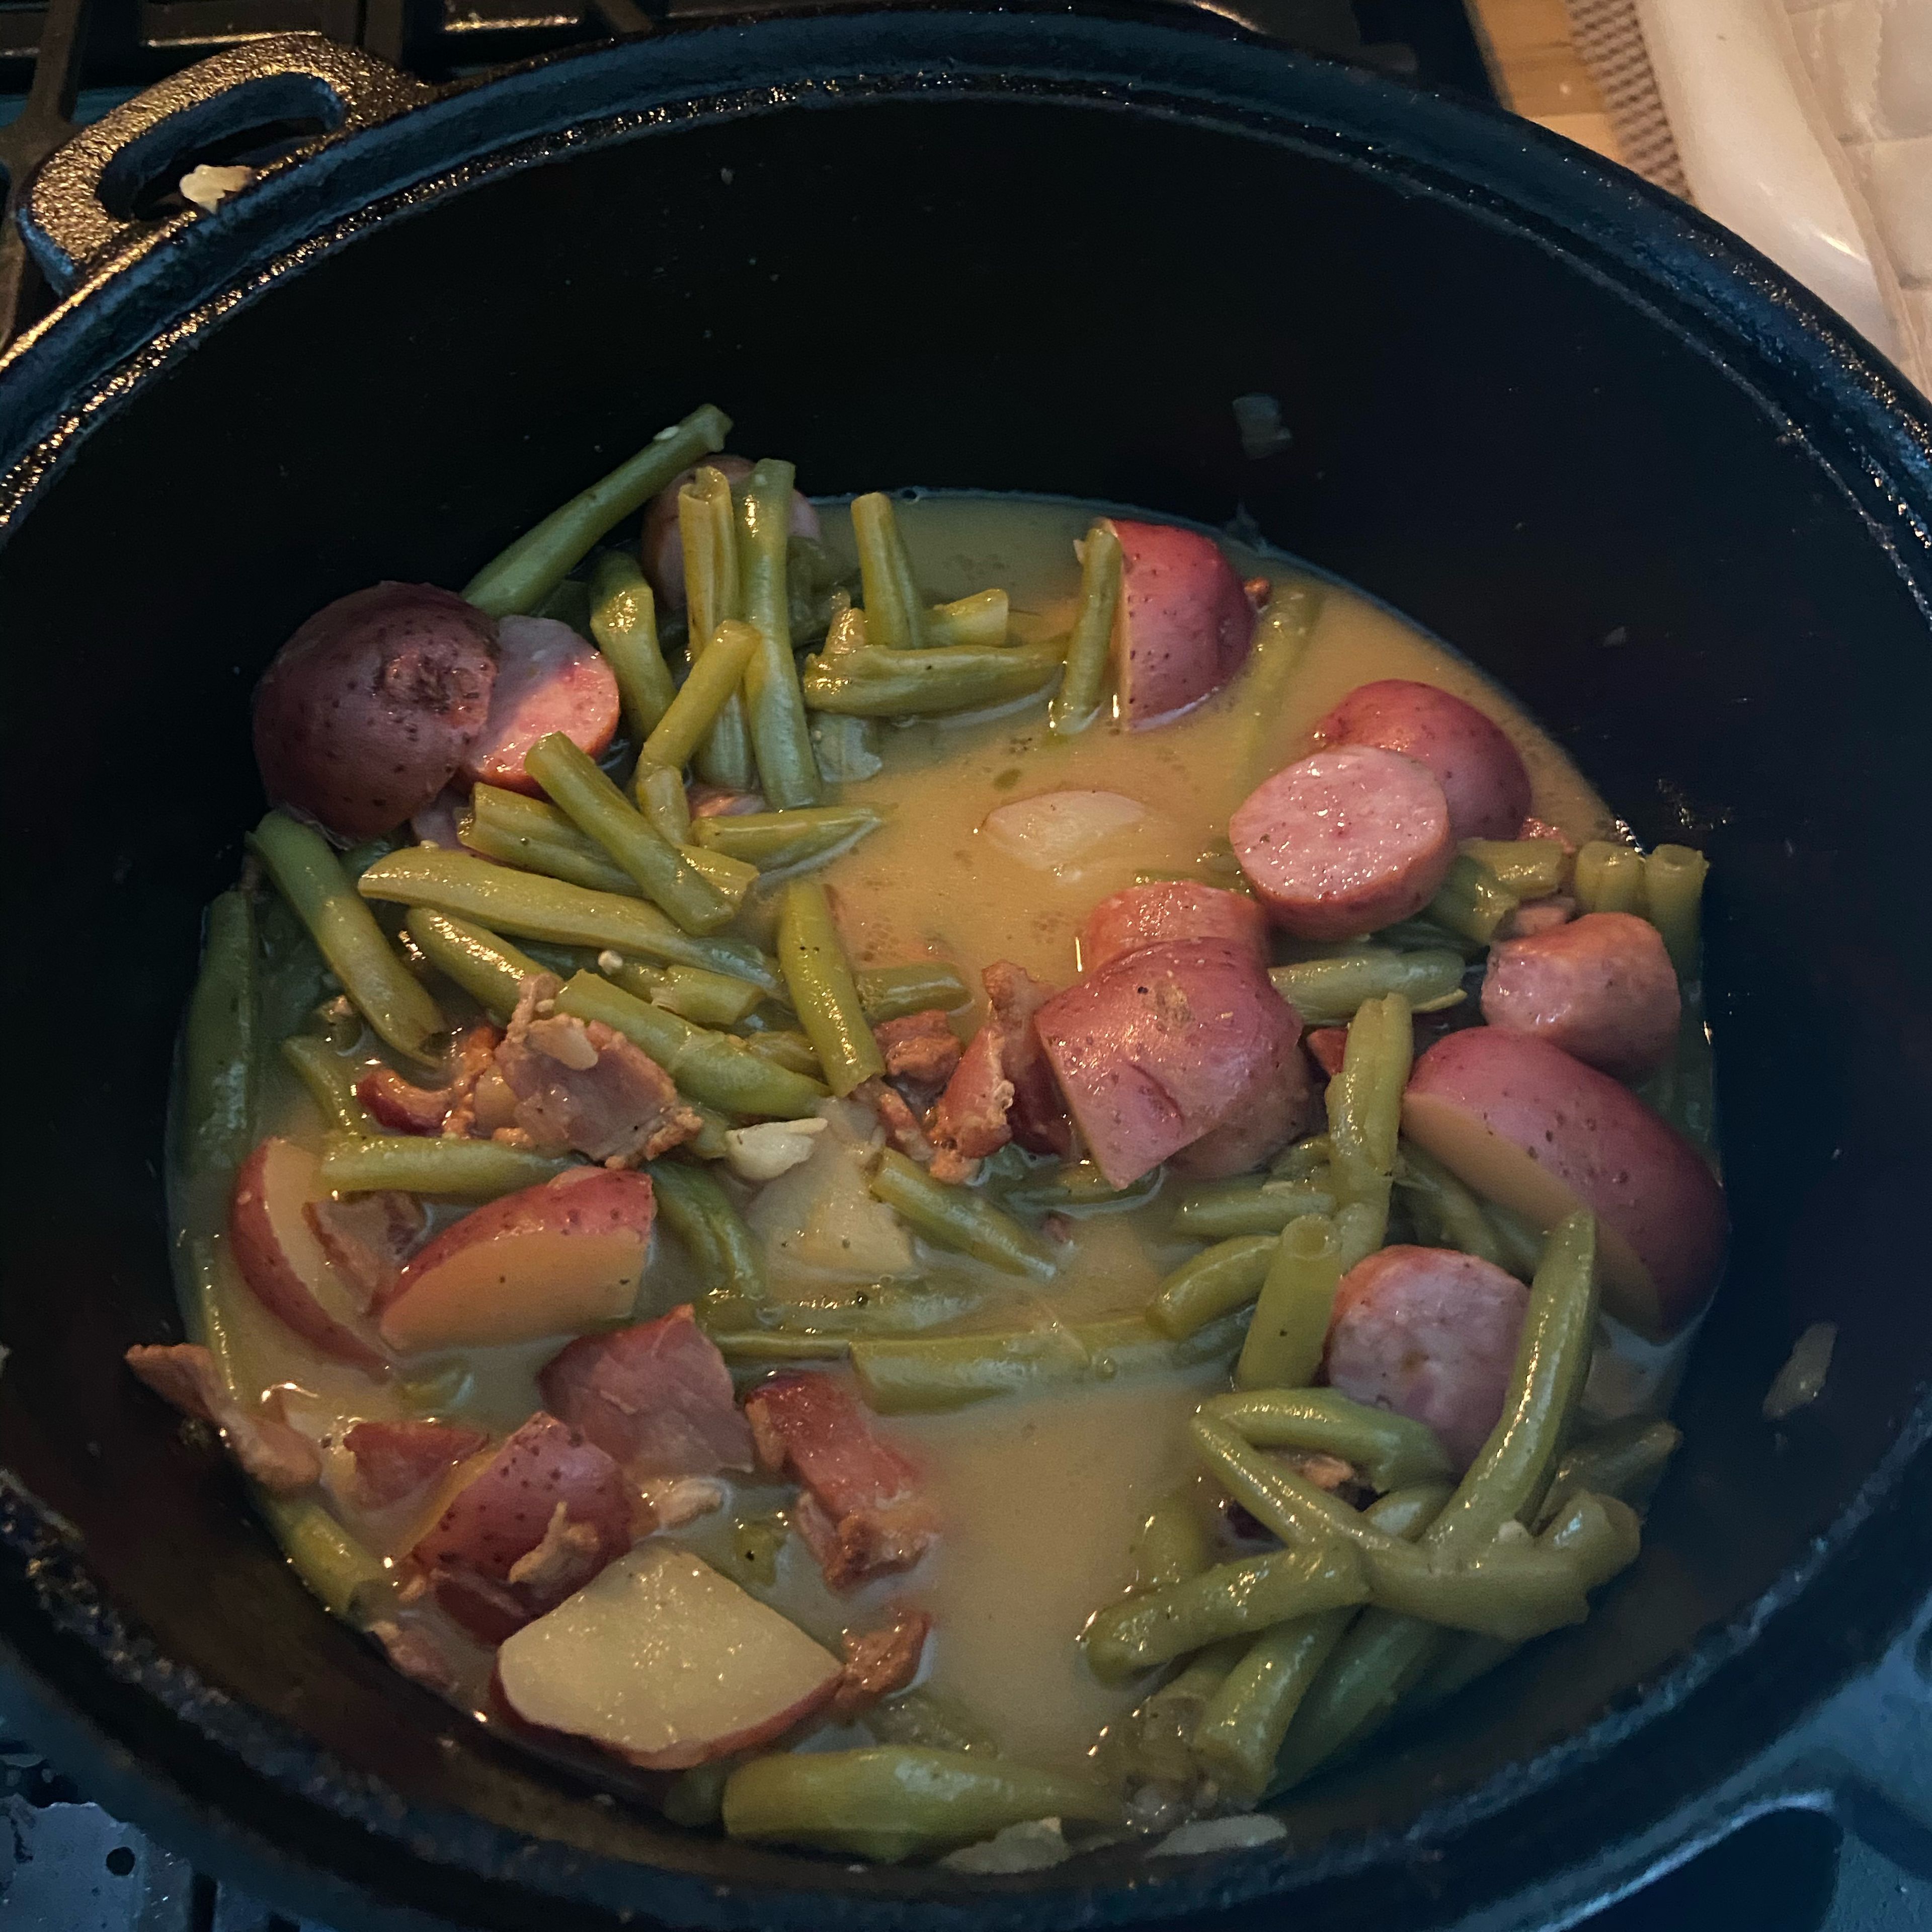 Bring it to a boil, reduce heat to low and cover and simmer for 45 minutes.￼